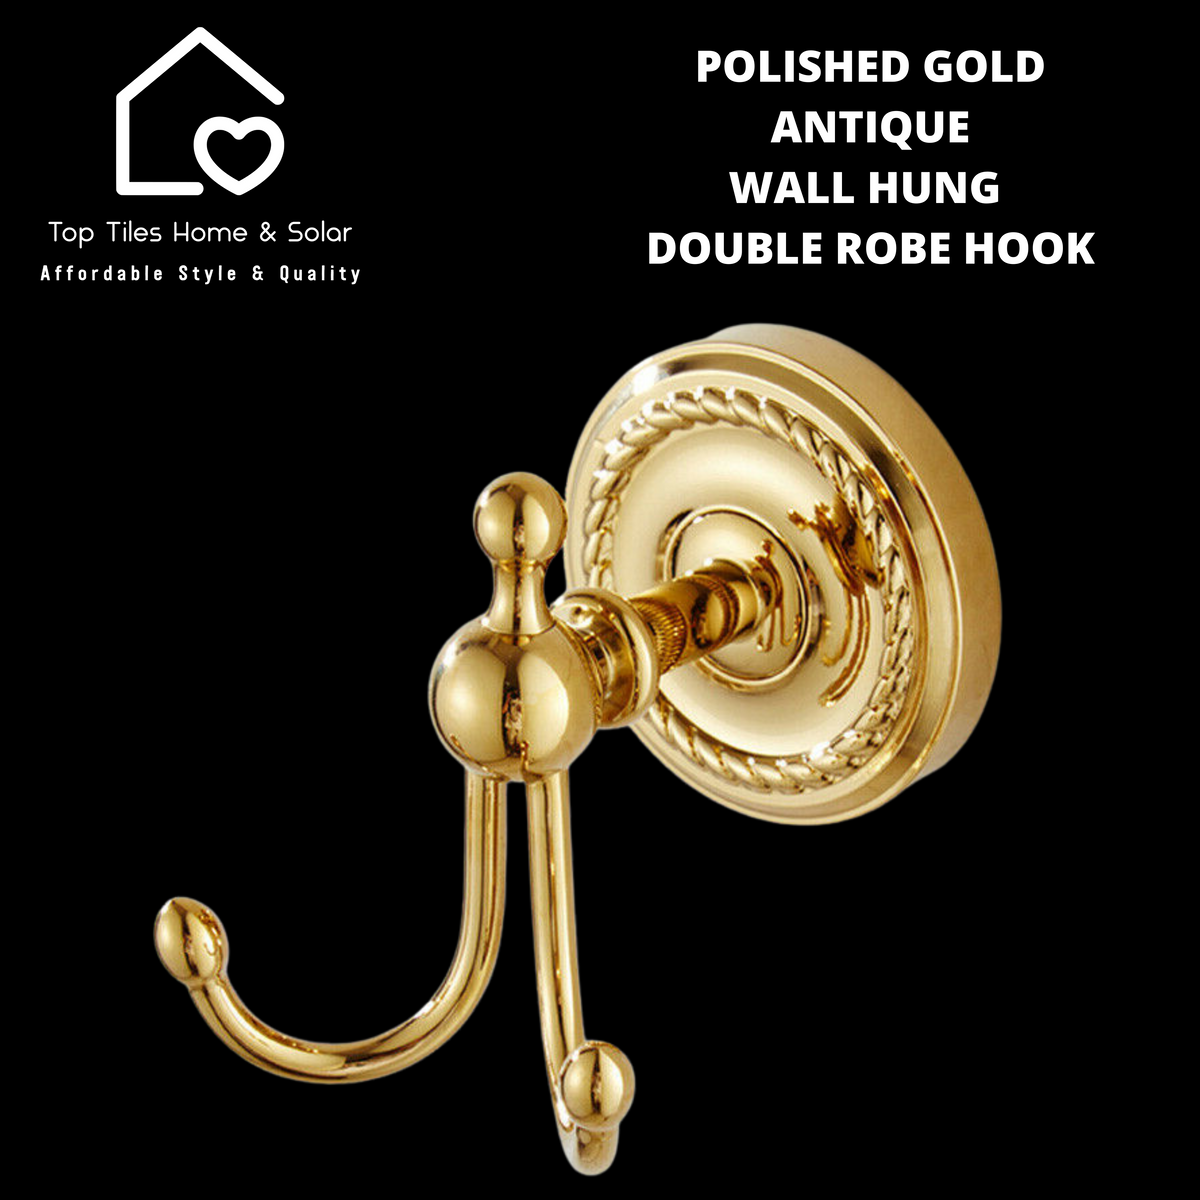 Polished Gold Antique Wall Hung Double Robe Hook – Top Tiles Home & Solar